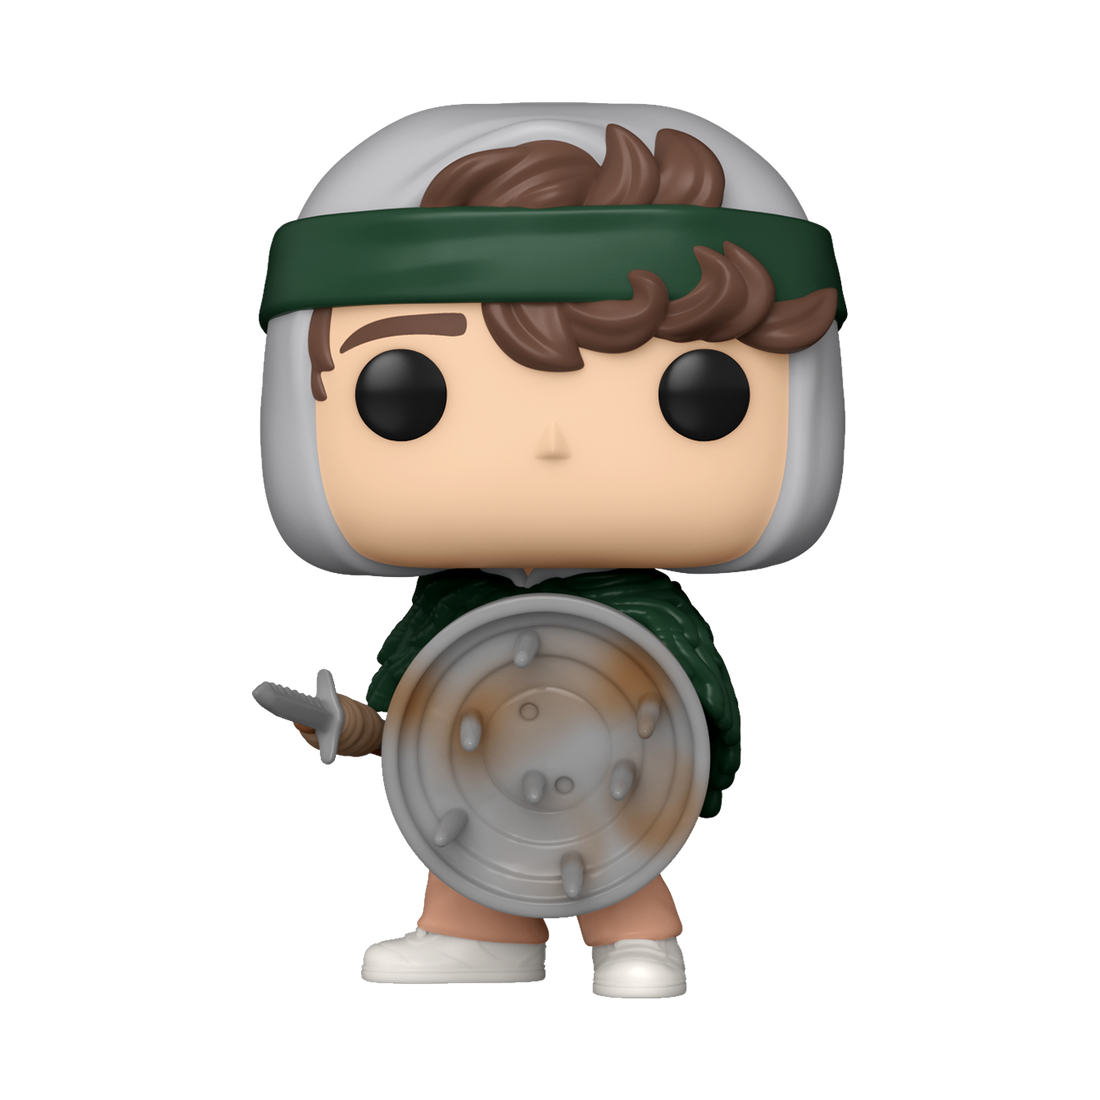 funko pop Stranger Things Dustin 1463 £13 plus 4.95 postage can combine